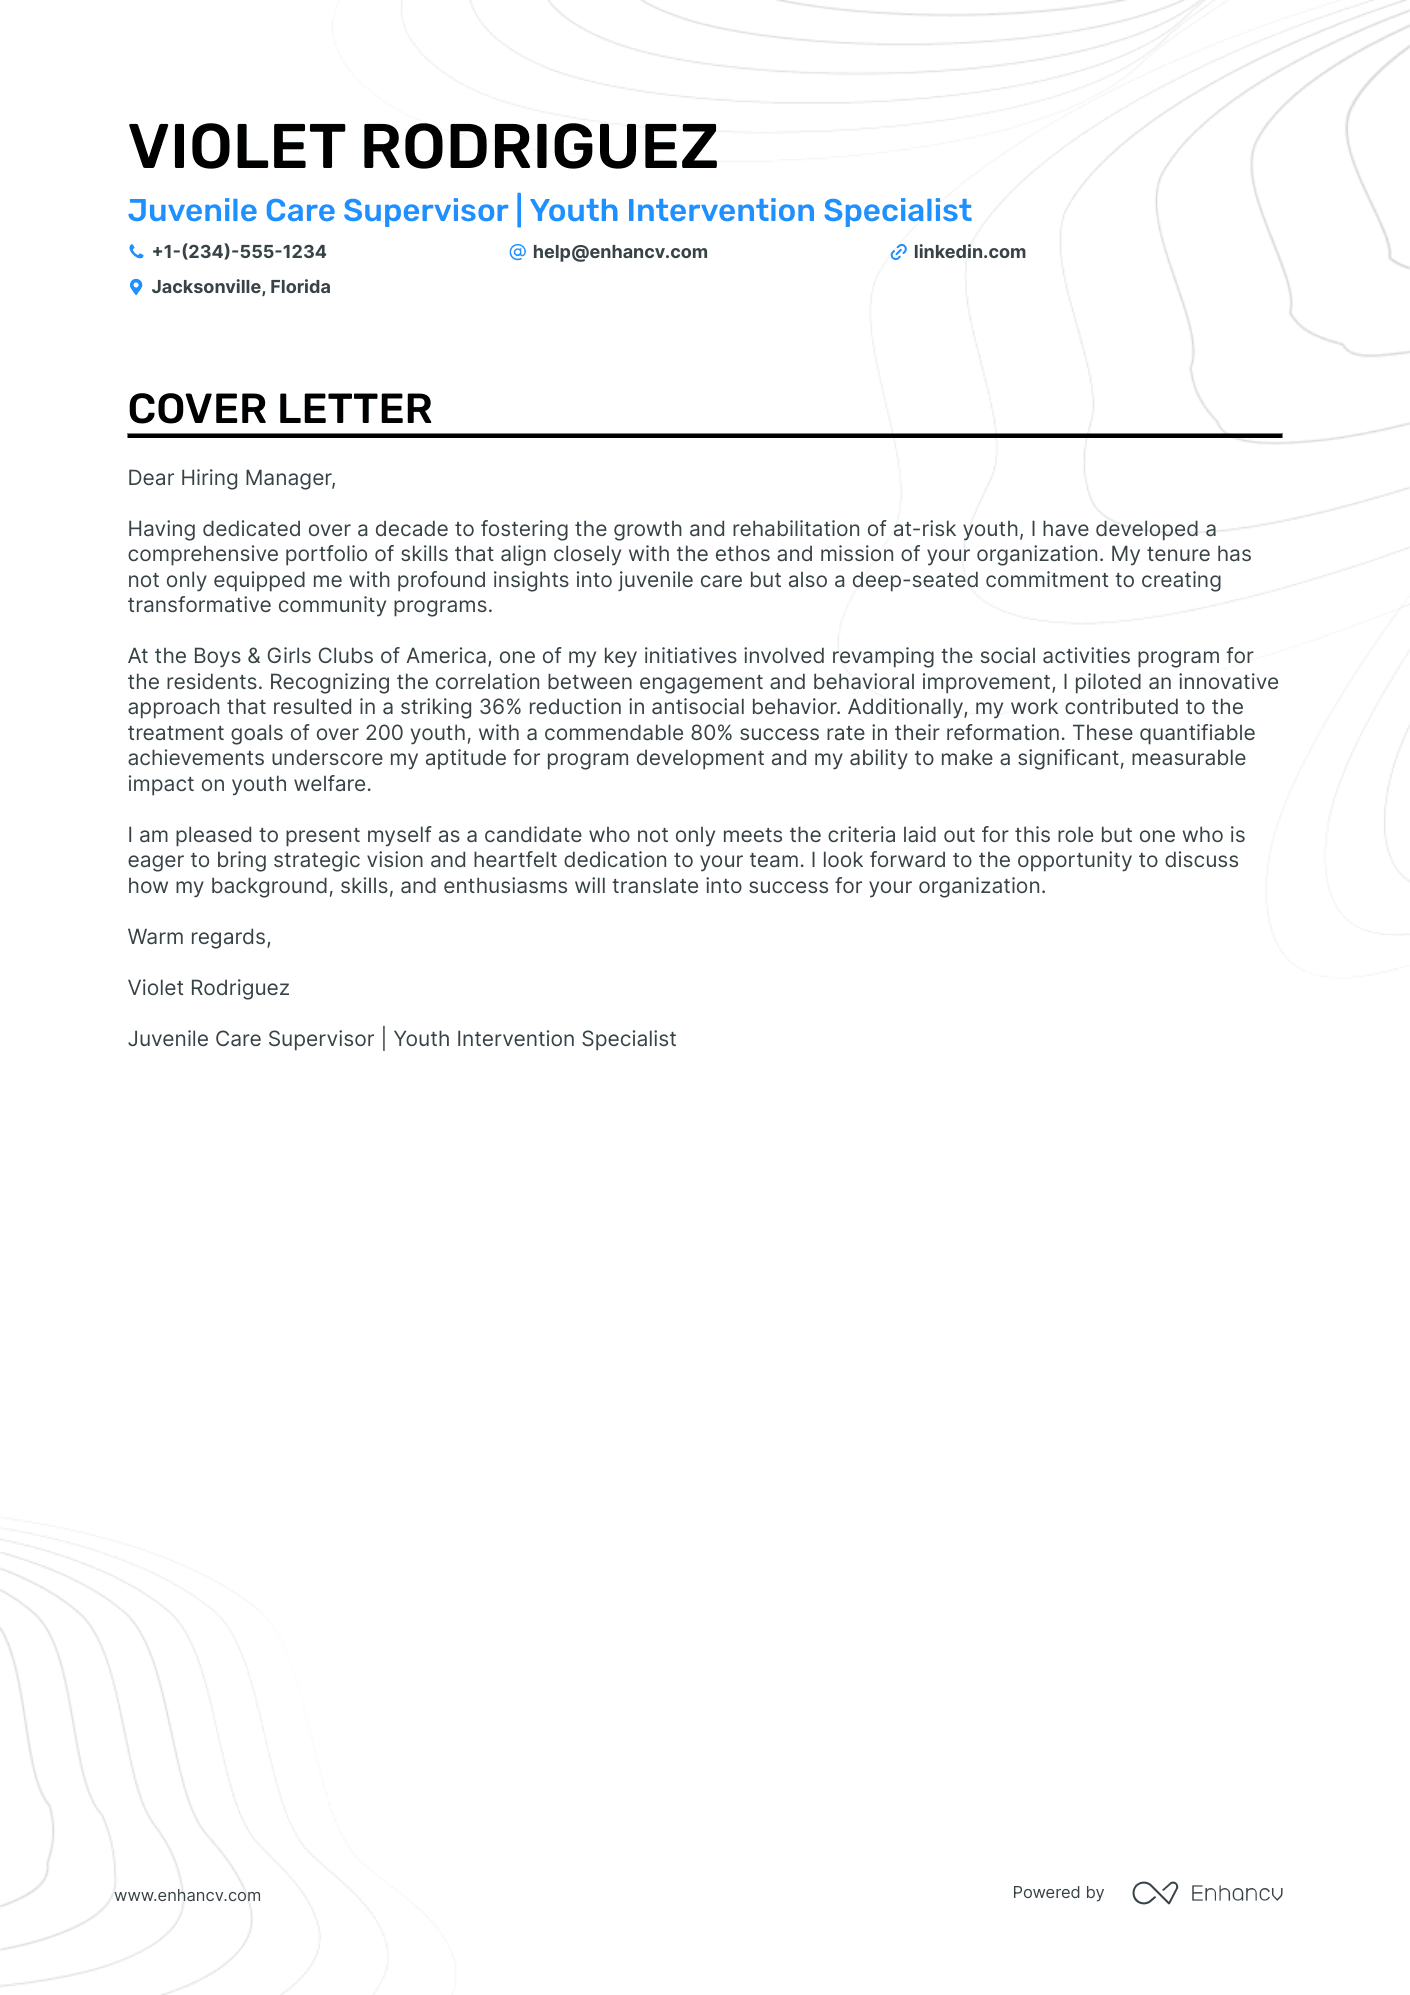 cover letter examples for mentor position